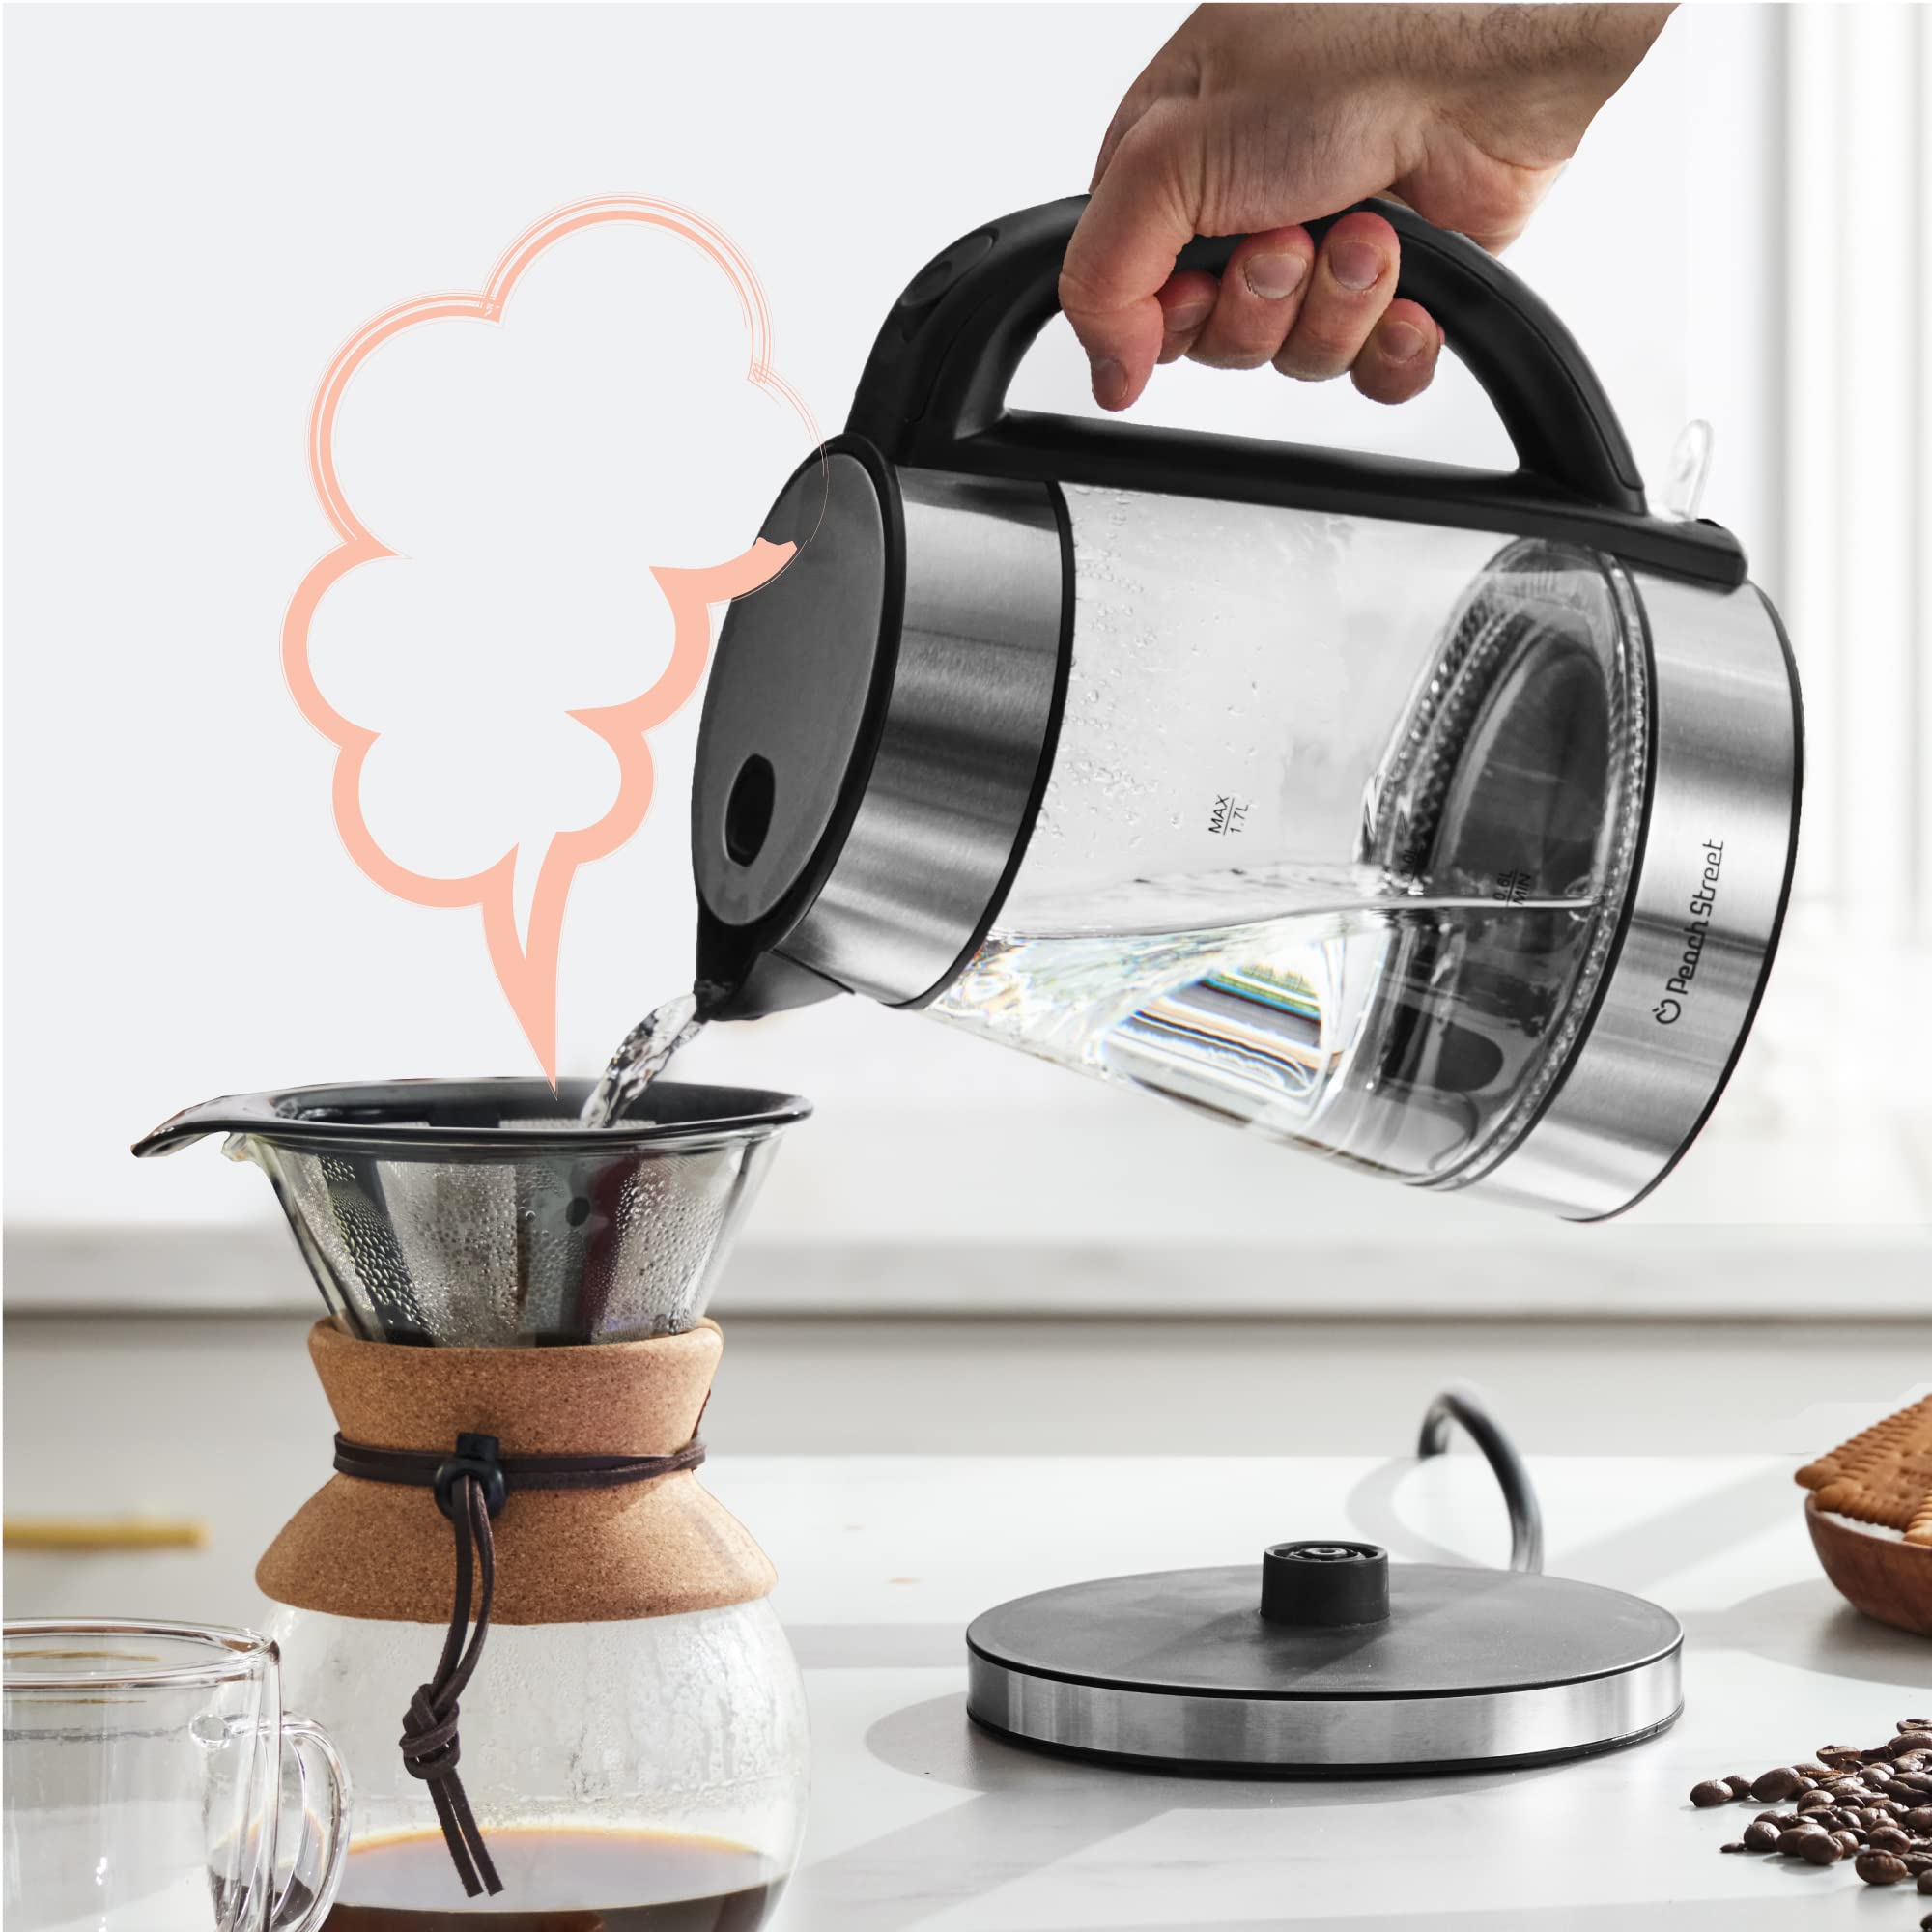 Speed-Boil Electric Kettle - 1.7L Water Boiler 1500W, Coffee & Tea Kettle Borosilicate Glass, Easy Clean Wide Opening, Auto Shut-Off, Cool Touch Handle, LED Light. 360° Rotation, Boil Dry Protection